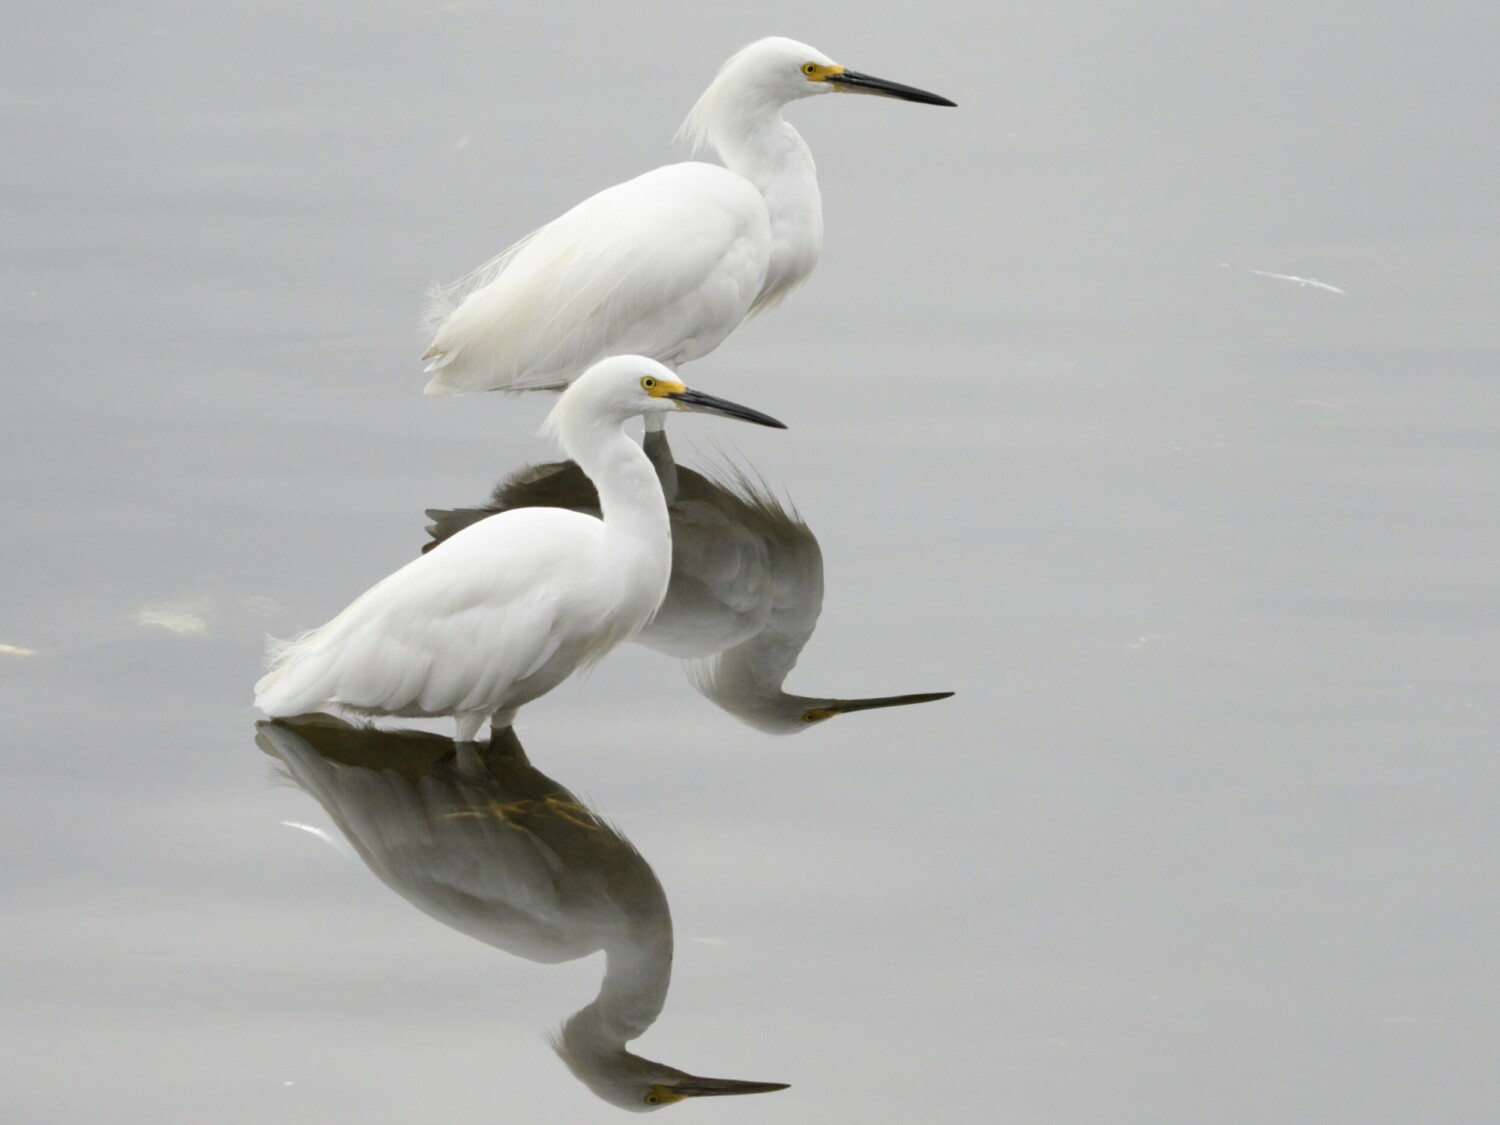 Two Snowy Egrets and Reflections